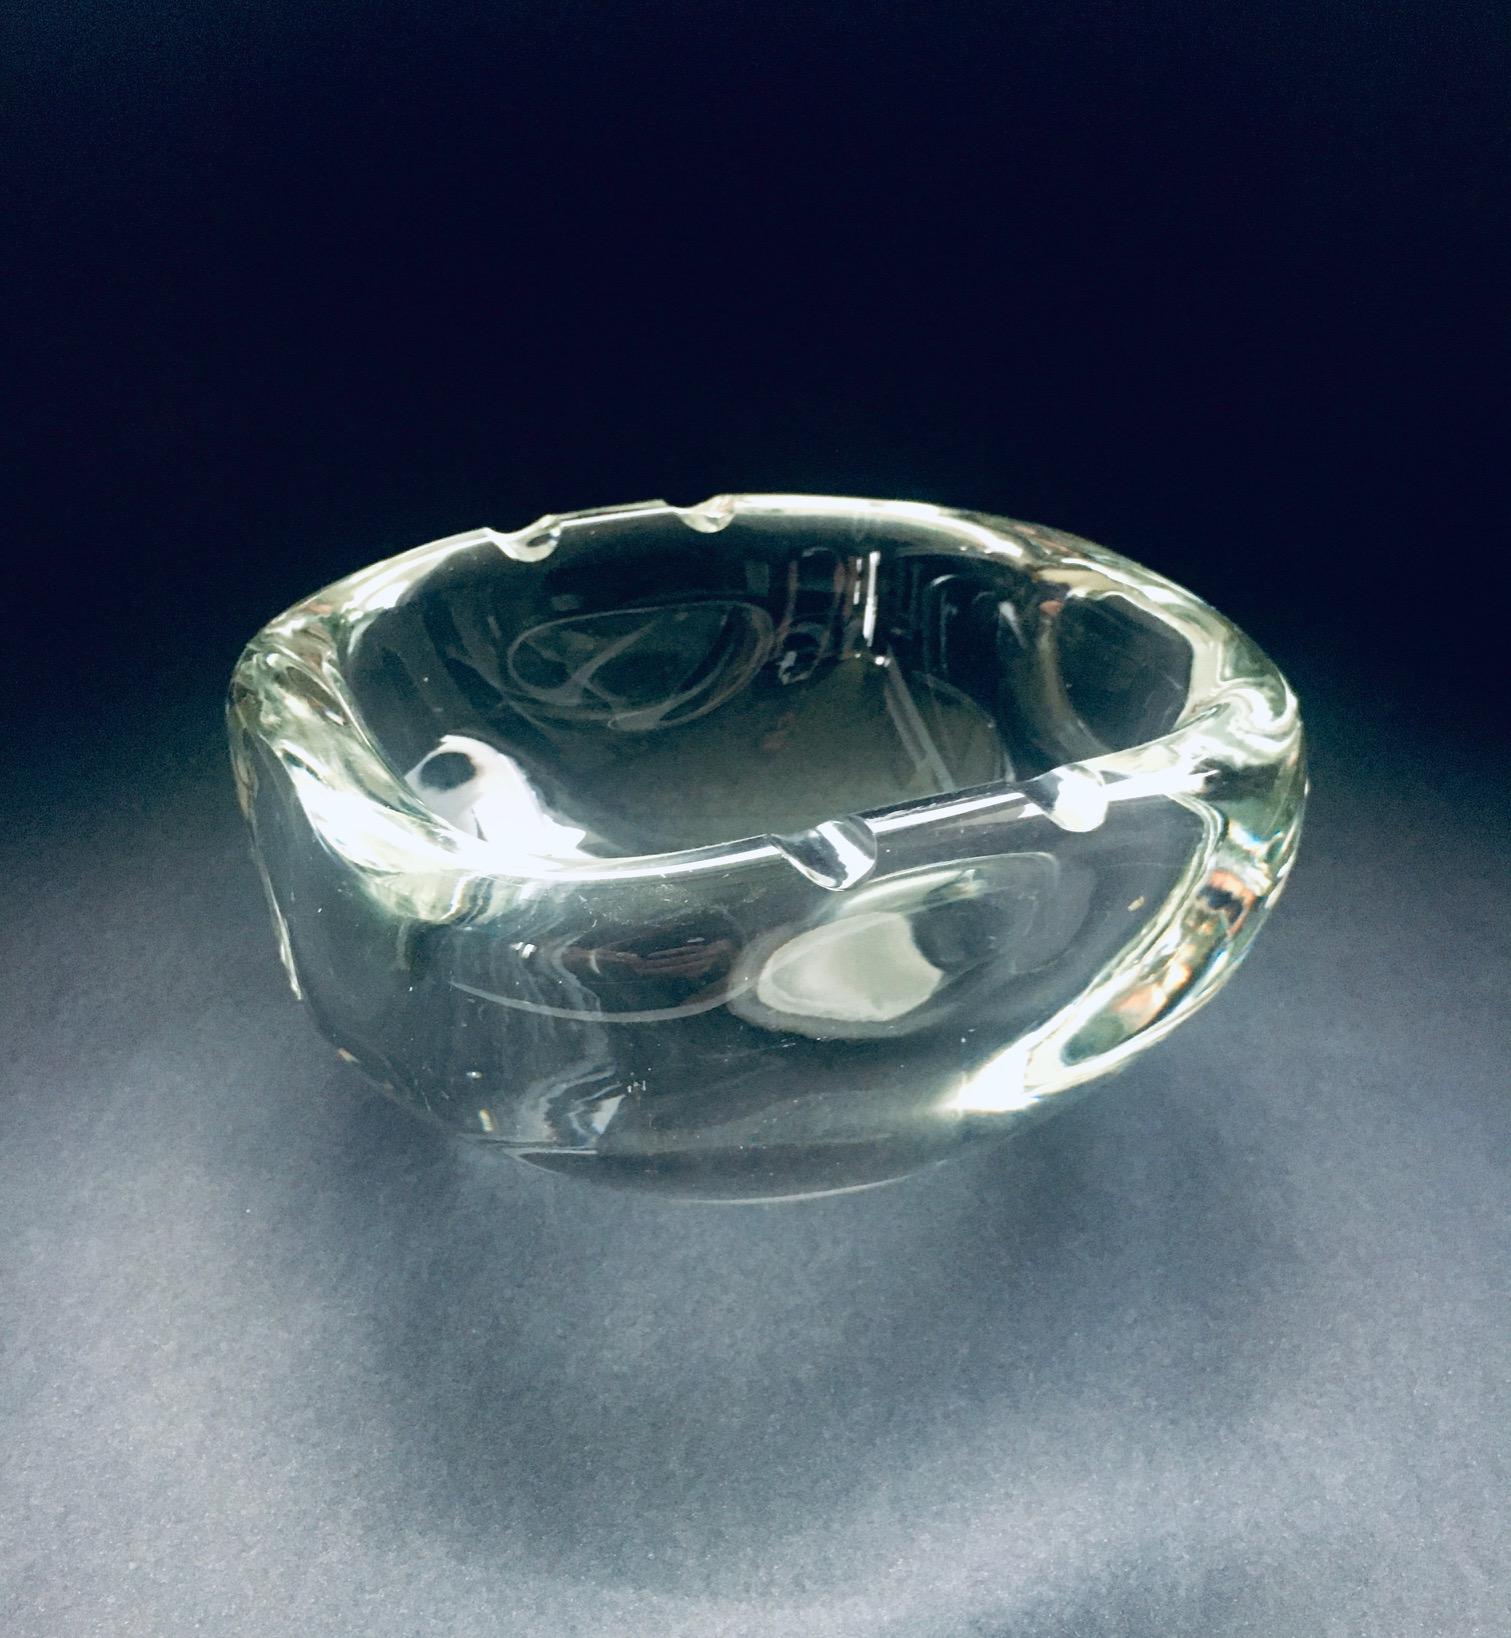 Vintage Art Glass Large Ashtray or Bowl by Barbini, Murano Italy 1960's For Sale 6